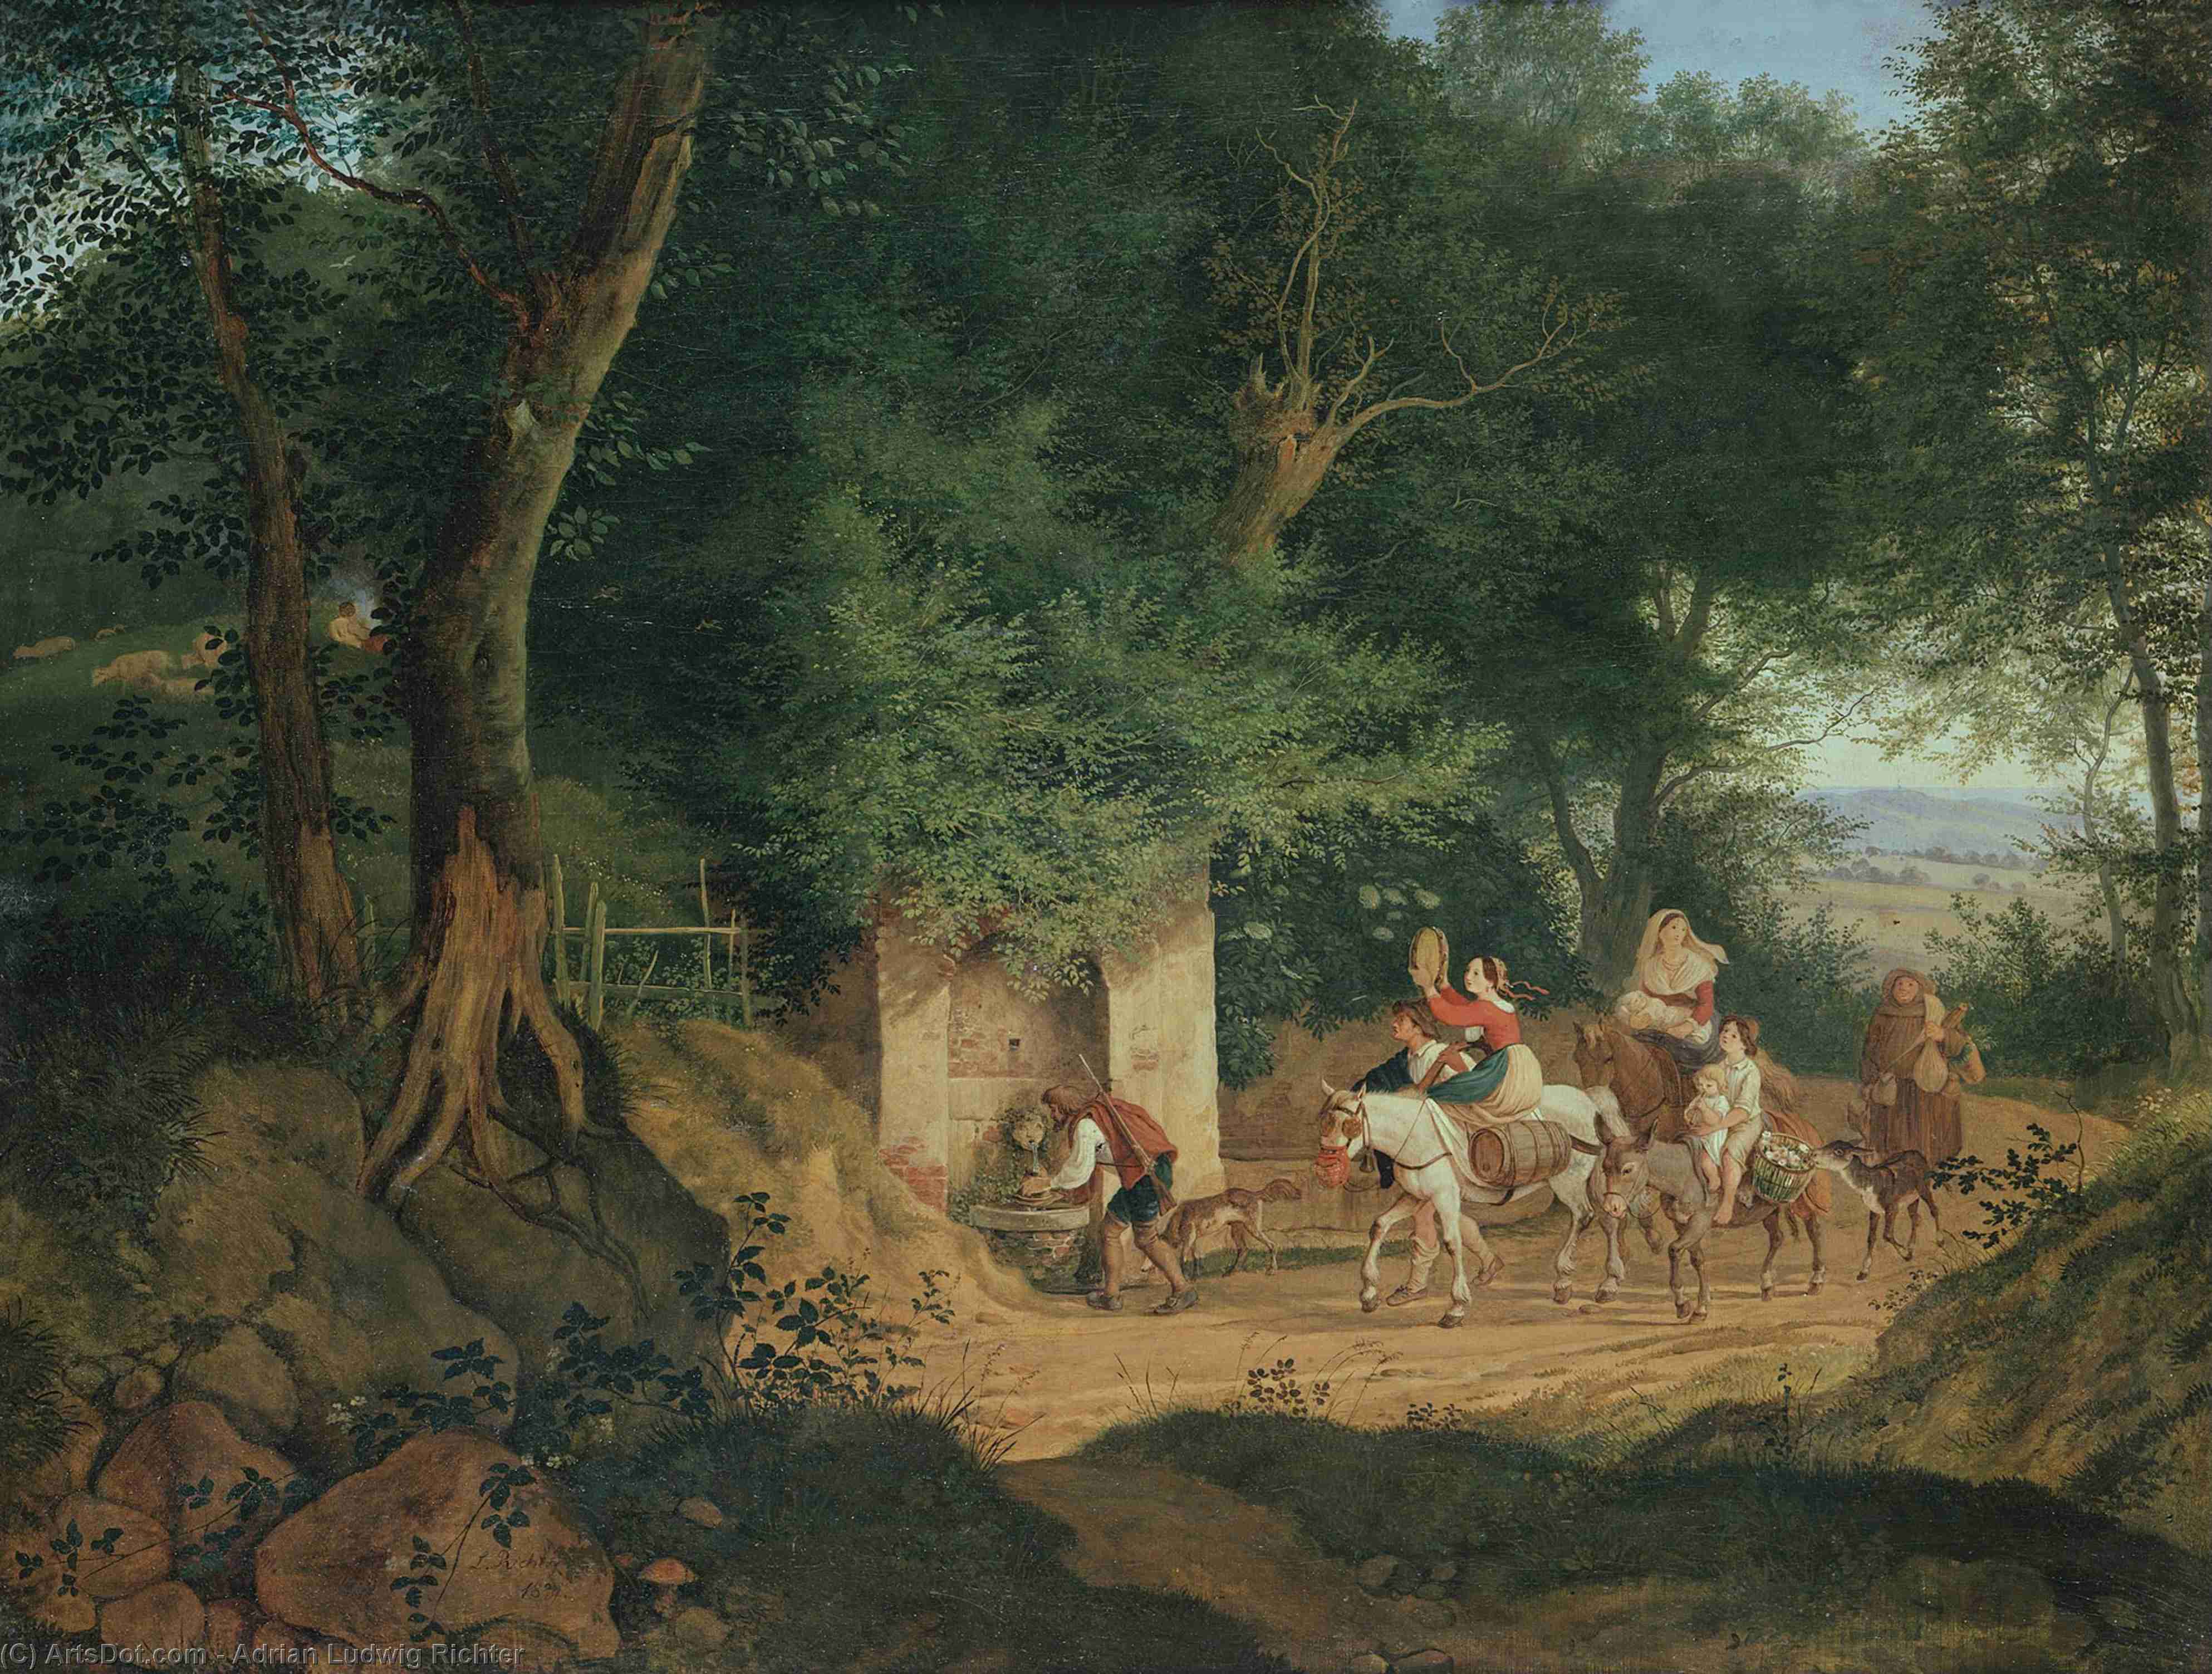 WikiOO.org - 백과 사전 - 회화, 삽화 Adrian Ludwig Richter - The Well in the Wood at Ariccia